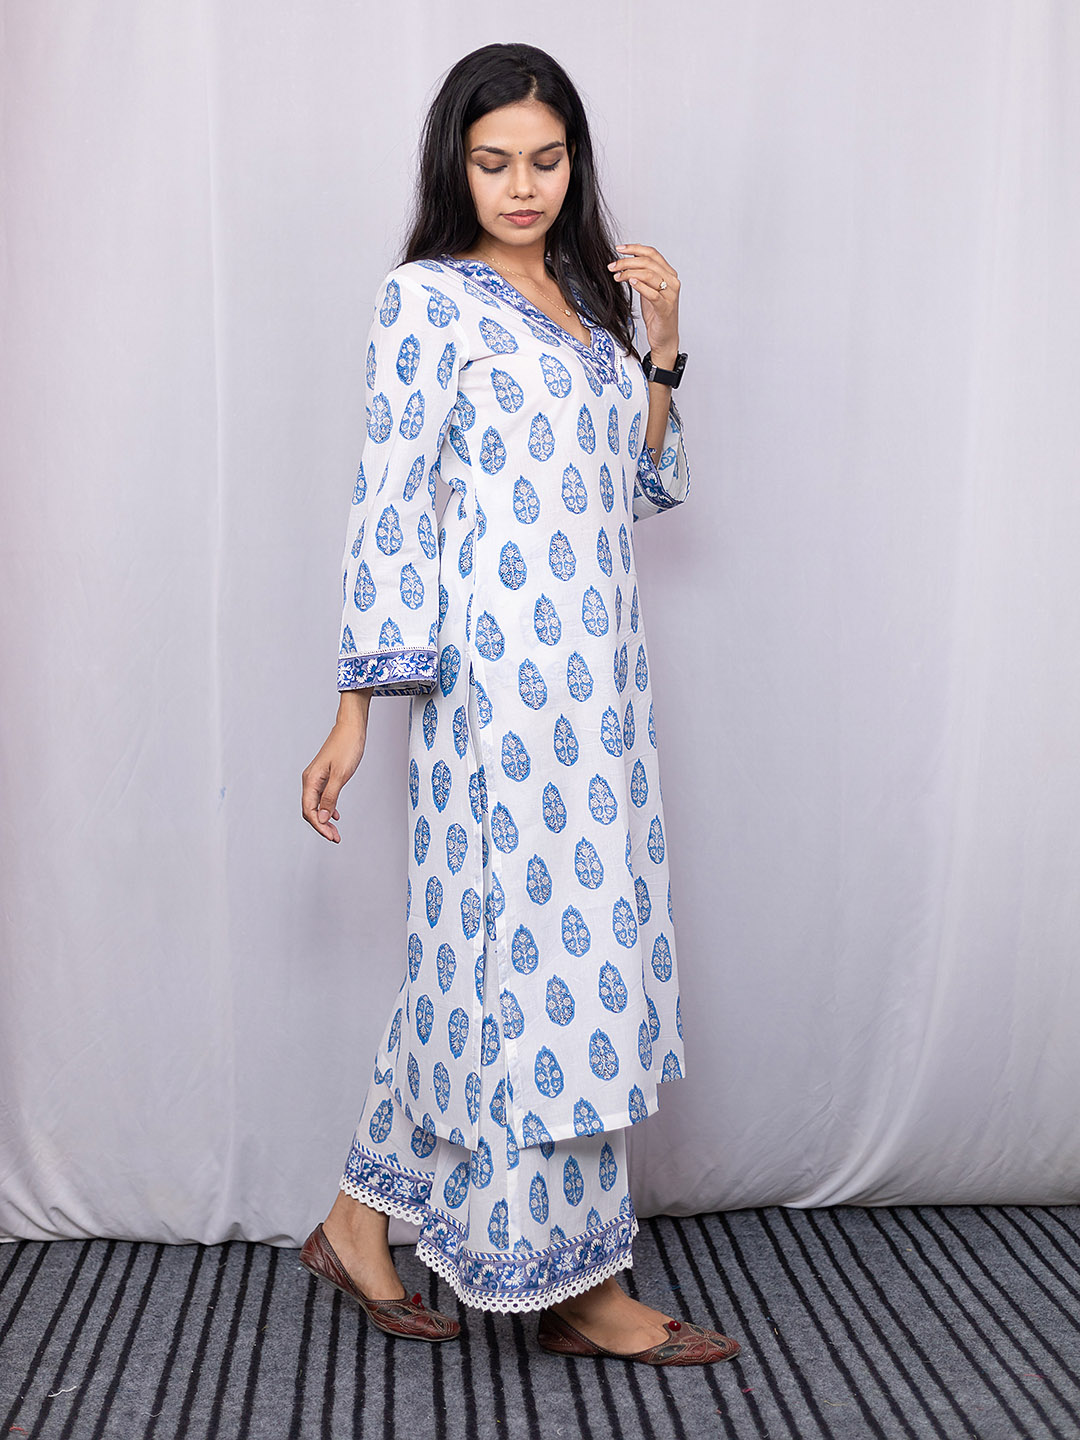 HandBlock Printed White and Blue Booty Kurta Set with Lace Detailing